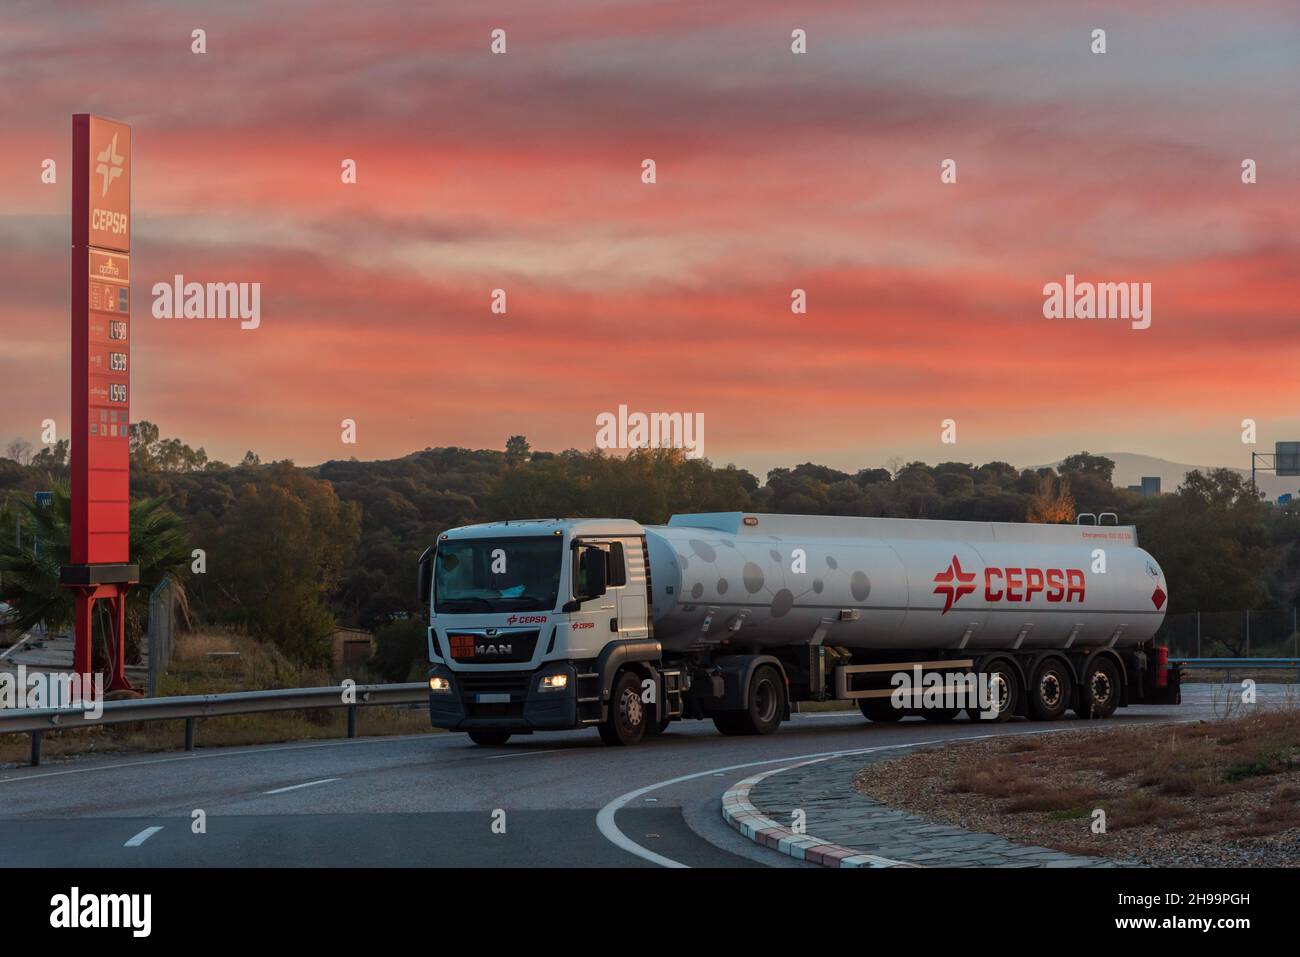 Tanker truck of the oil company Cepsa next to a monolith of a service station at dusk. Stock Photo